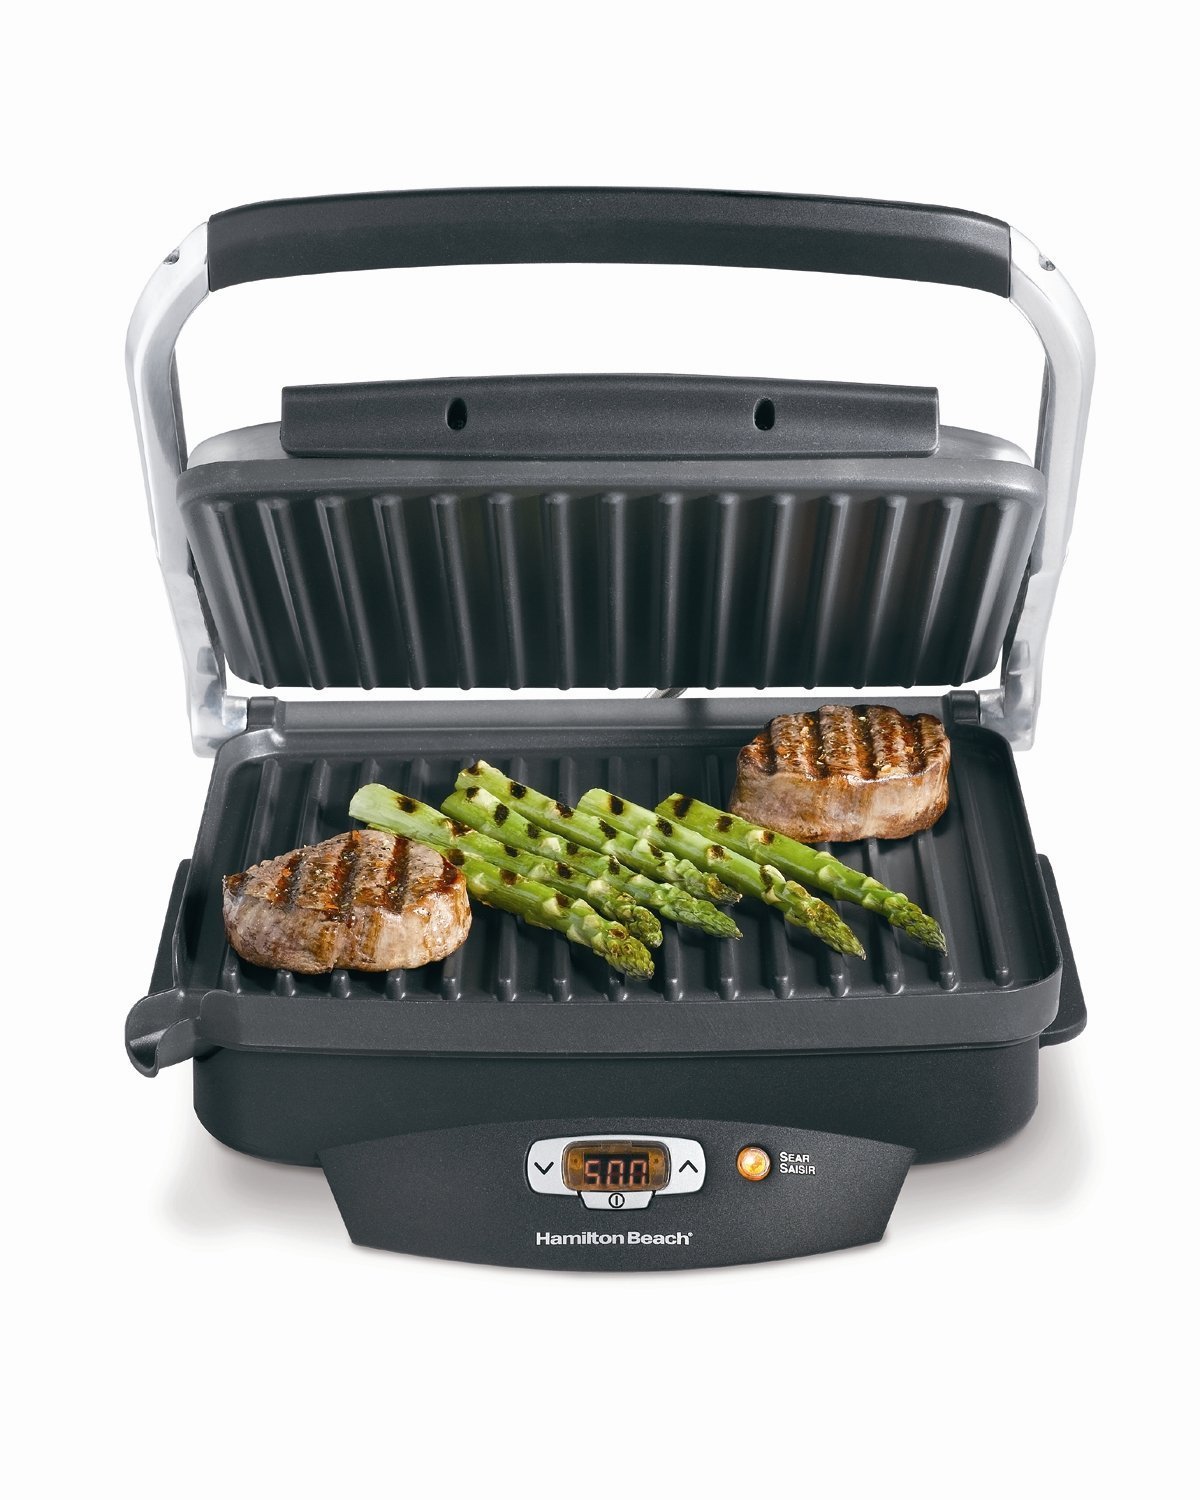 Gadgets For Your Home and Kitchen: Best Rated Indoor Electric Grills 2017